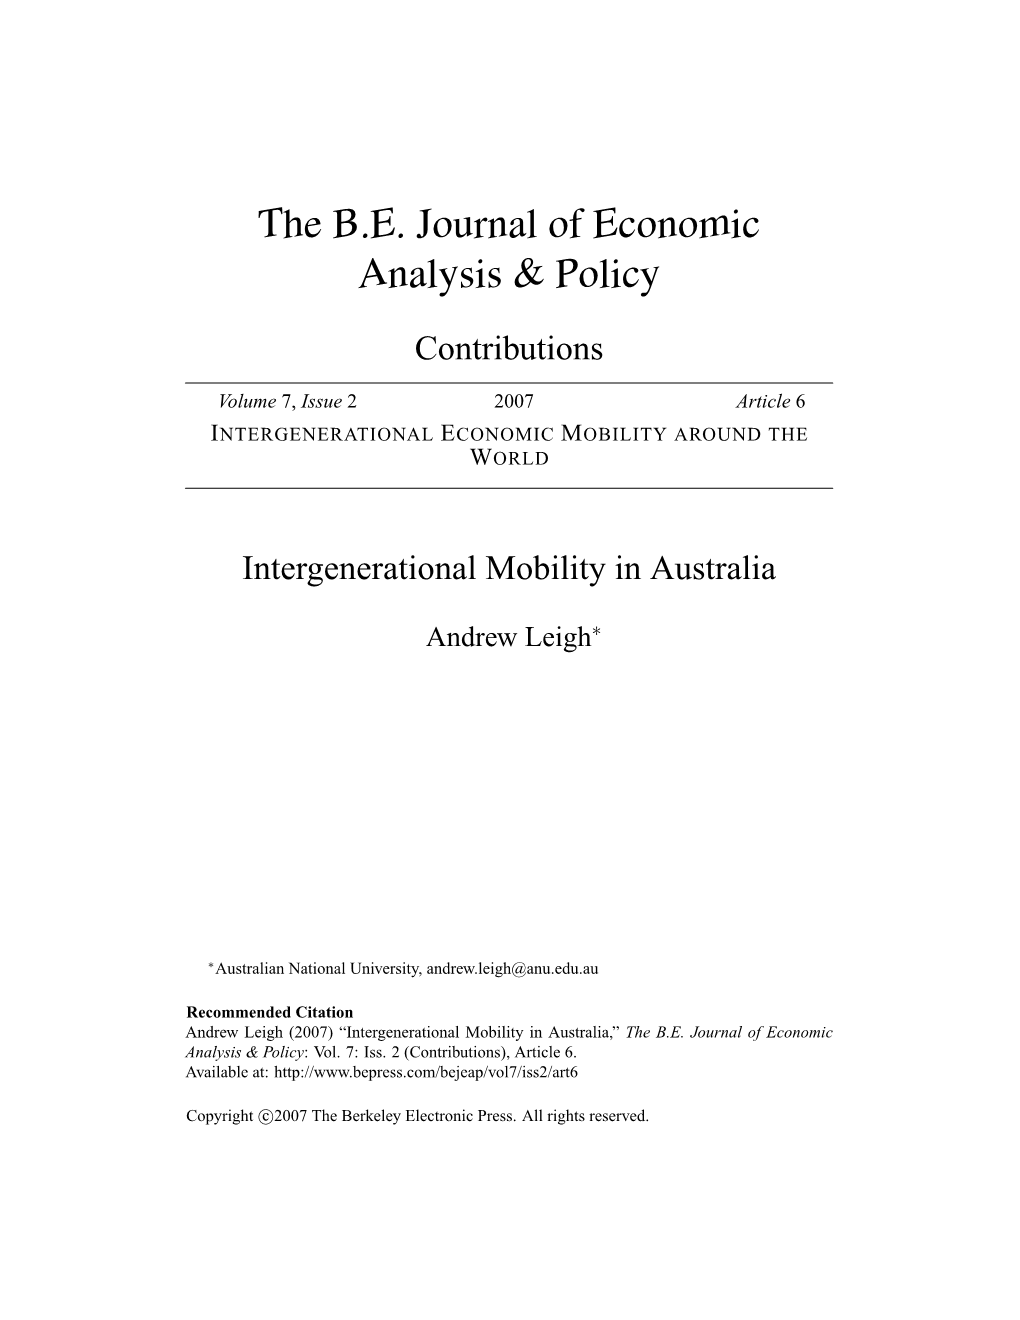 Intergenerational Mobility in Australia